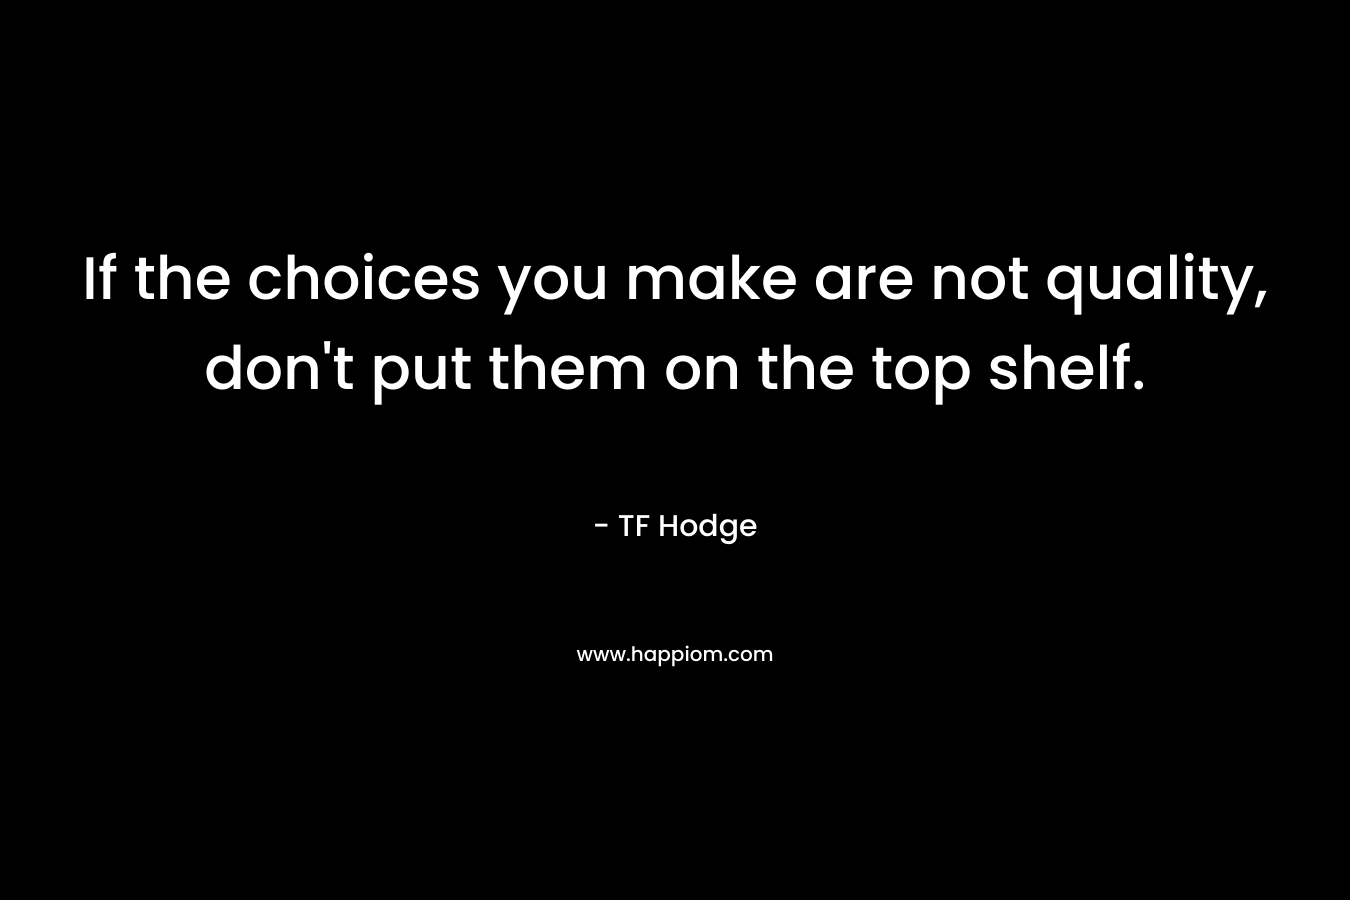 If the choices you make are not quality, don’t put them on the top shelf. – TF Hodge